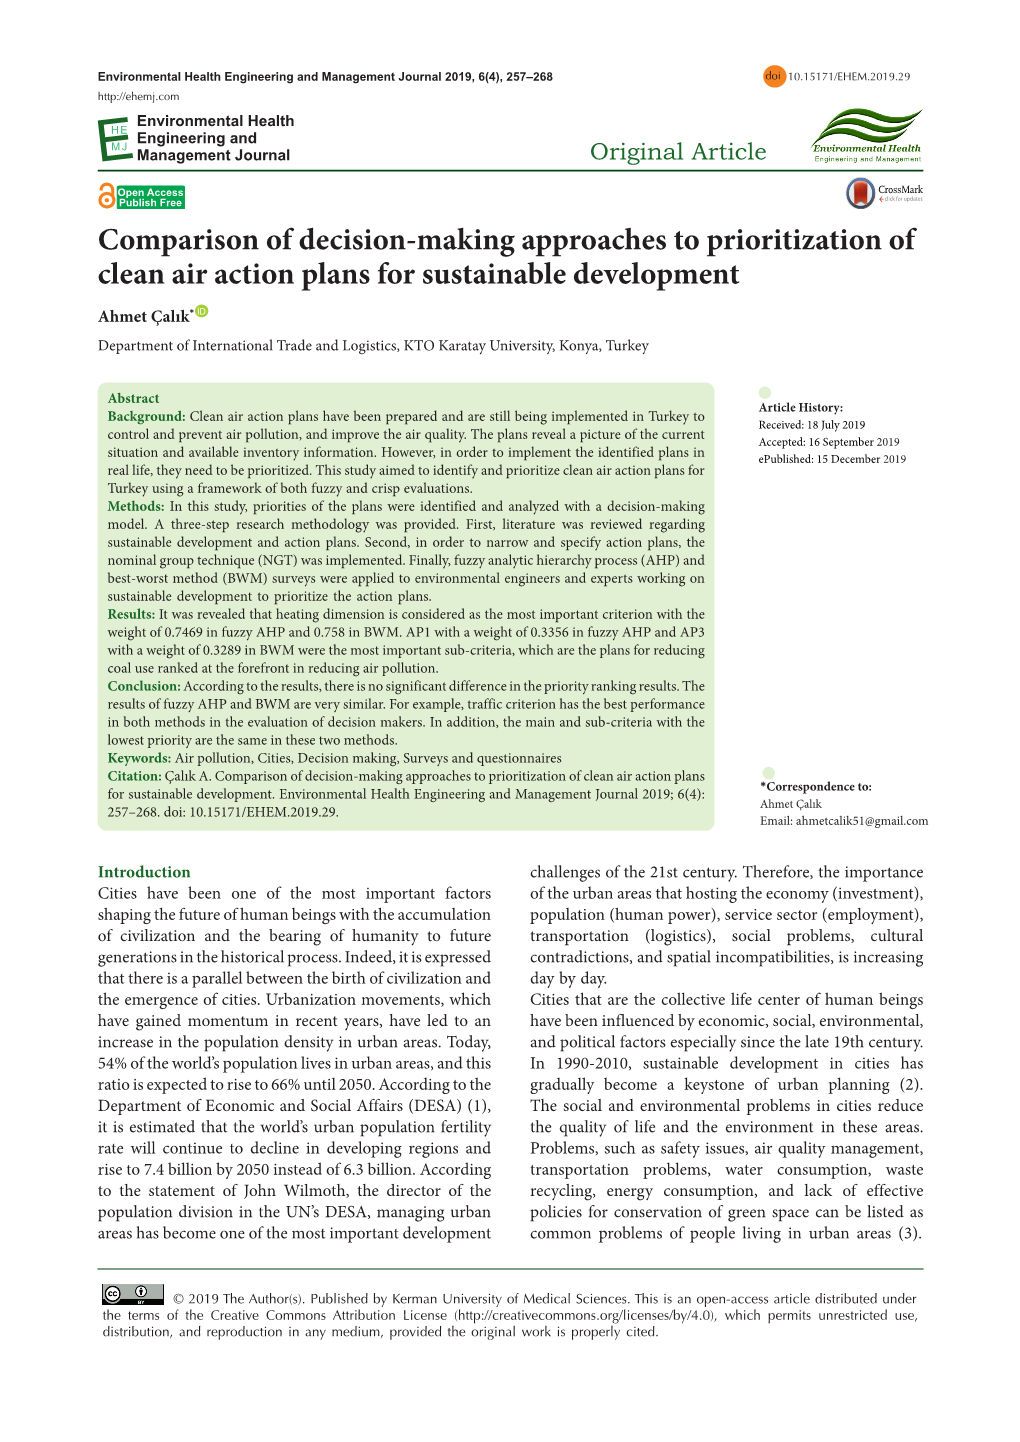 Comparison of Decision-Making Approaches to Prioritization of Clean